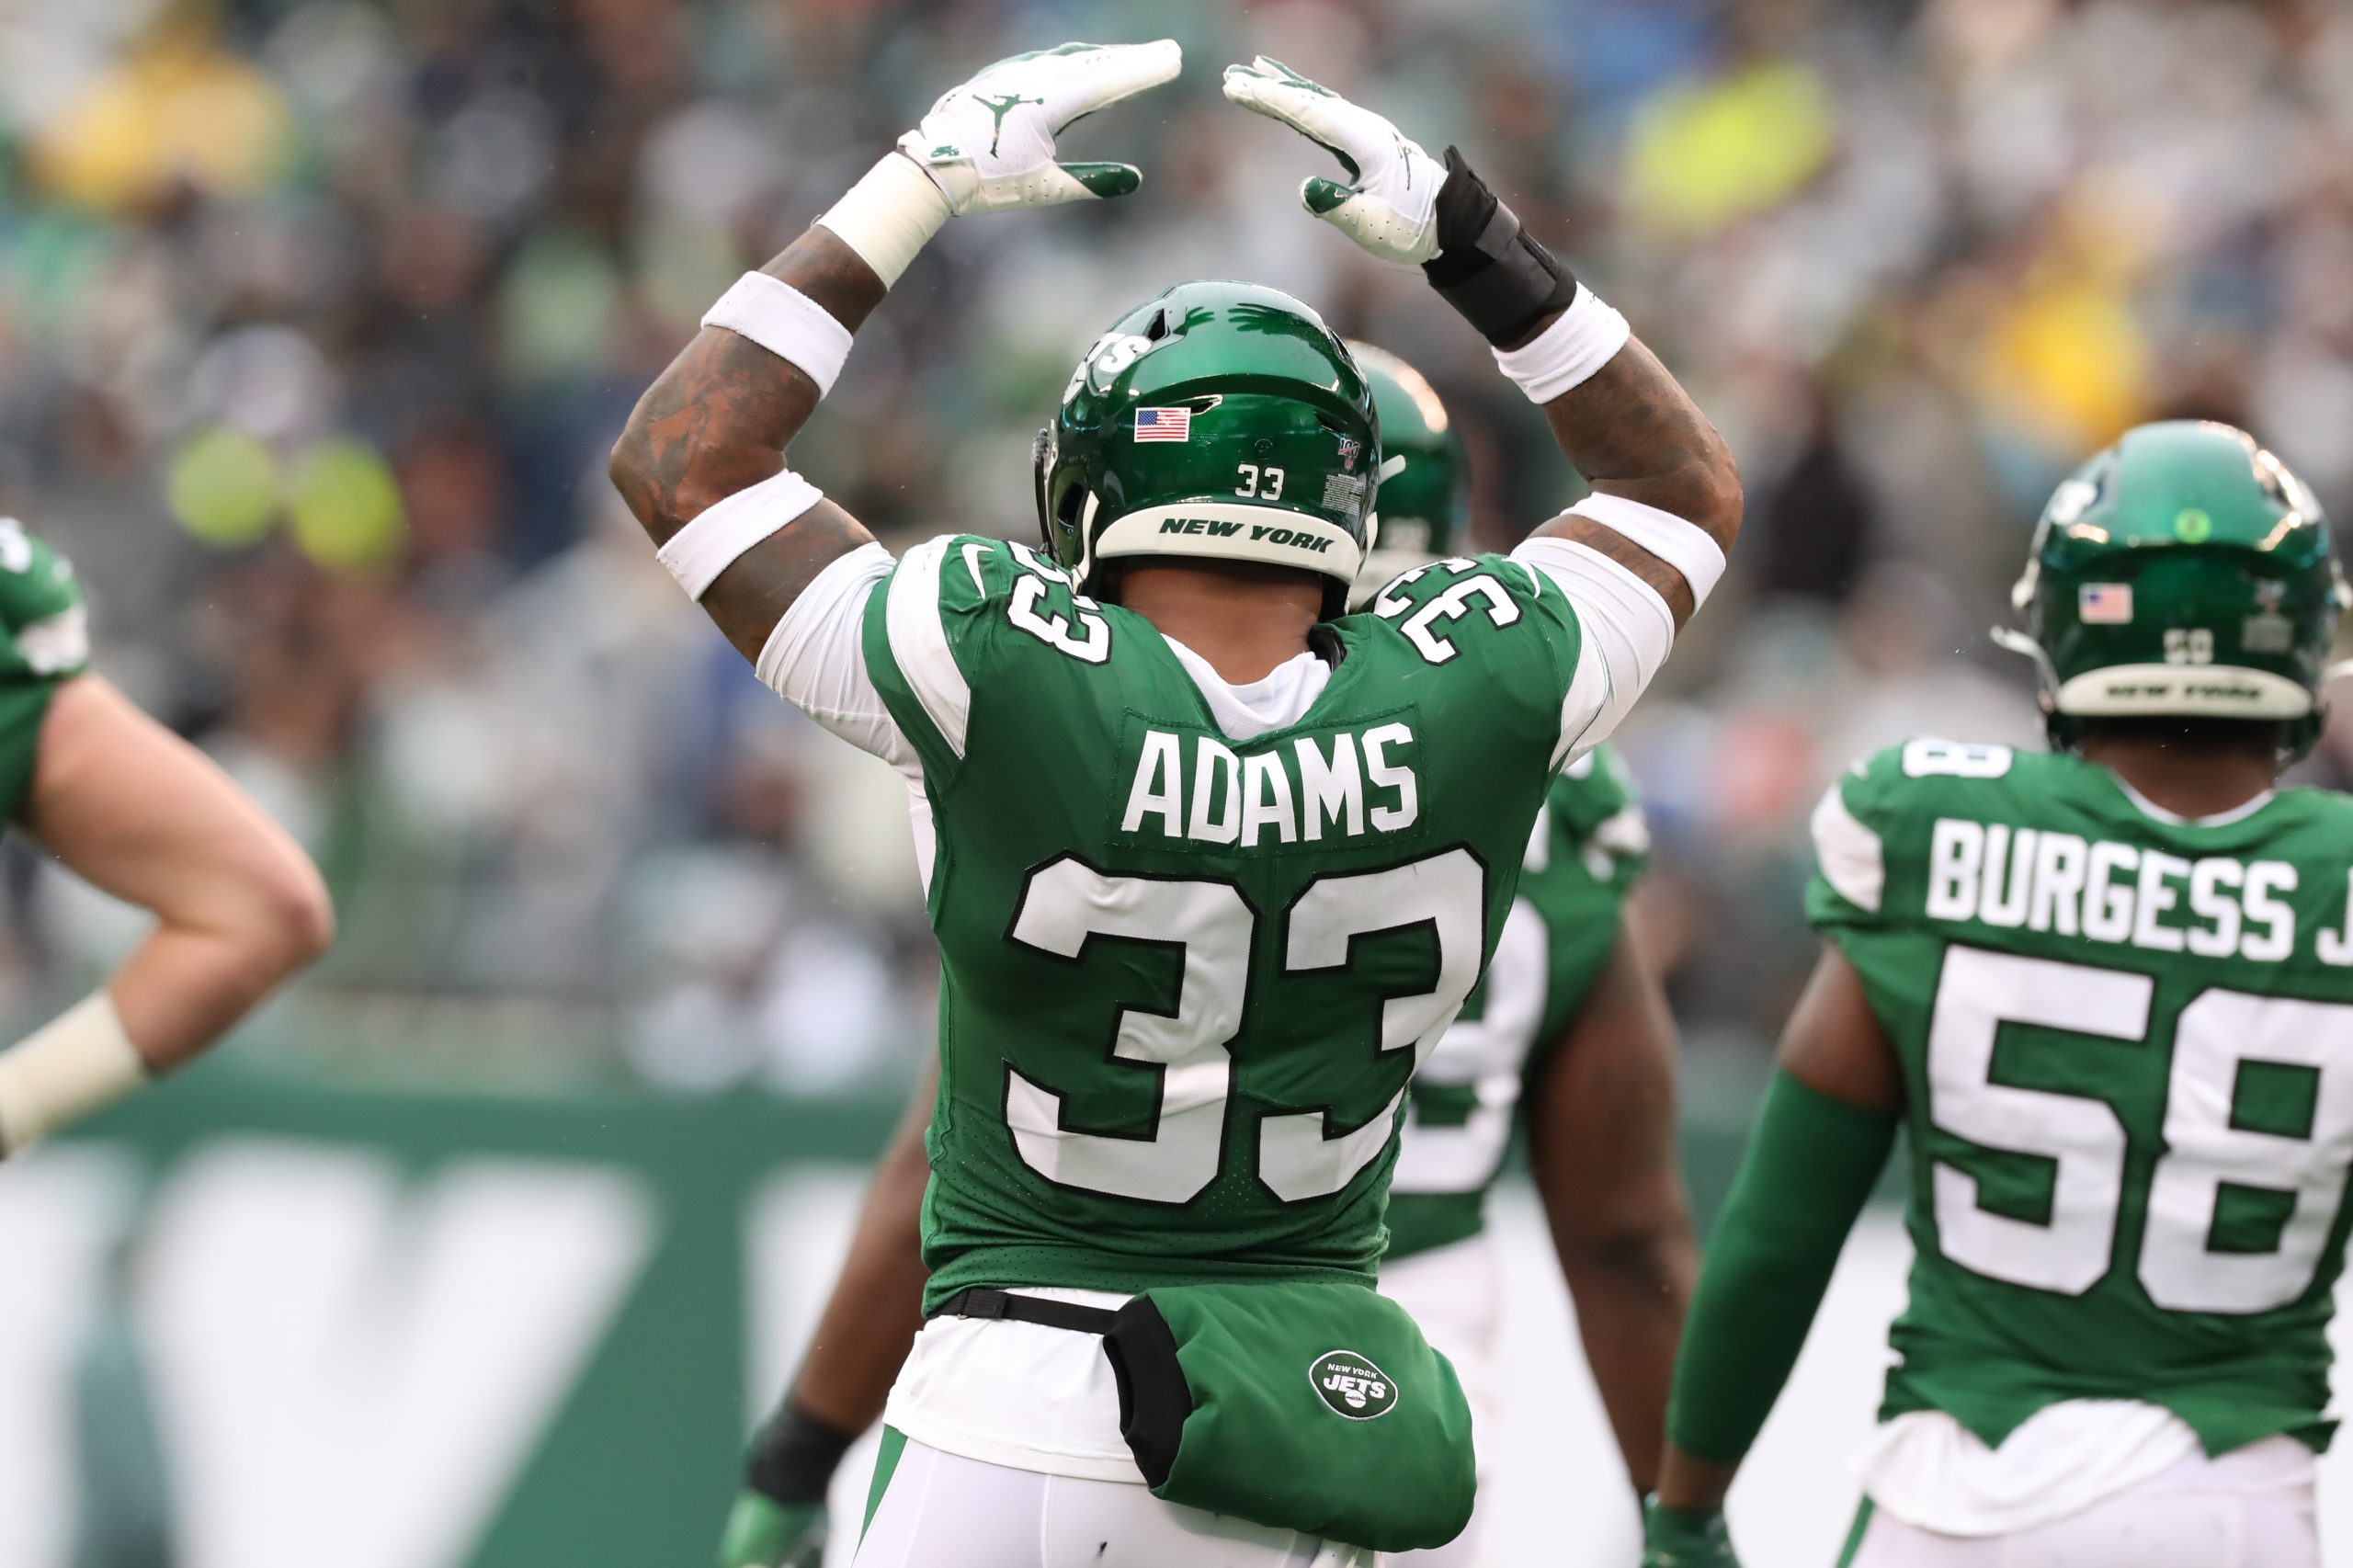 EAST RUTHERFORD, NJ - NOVEMBER 24: New York Jets strong safety Jamal Adams (33) during the National Football League game